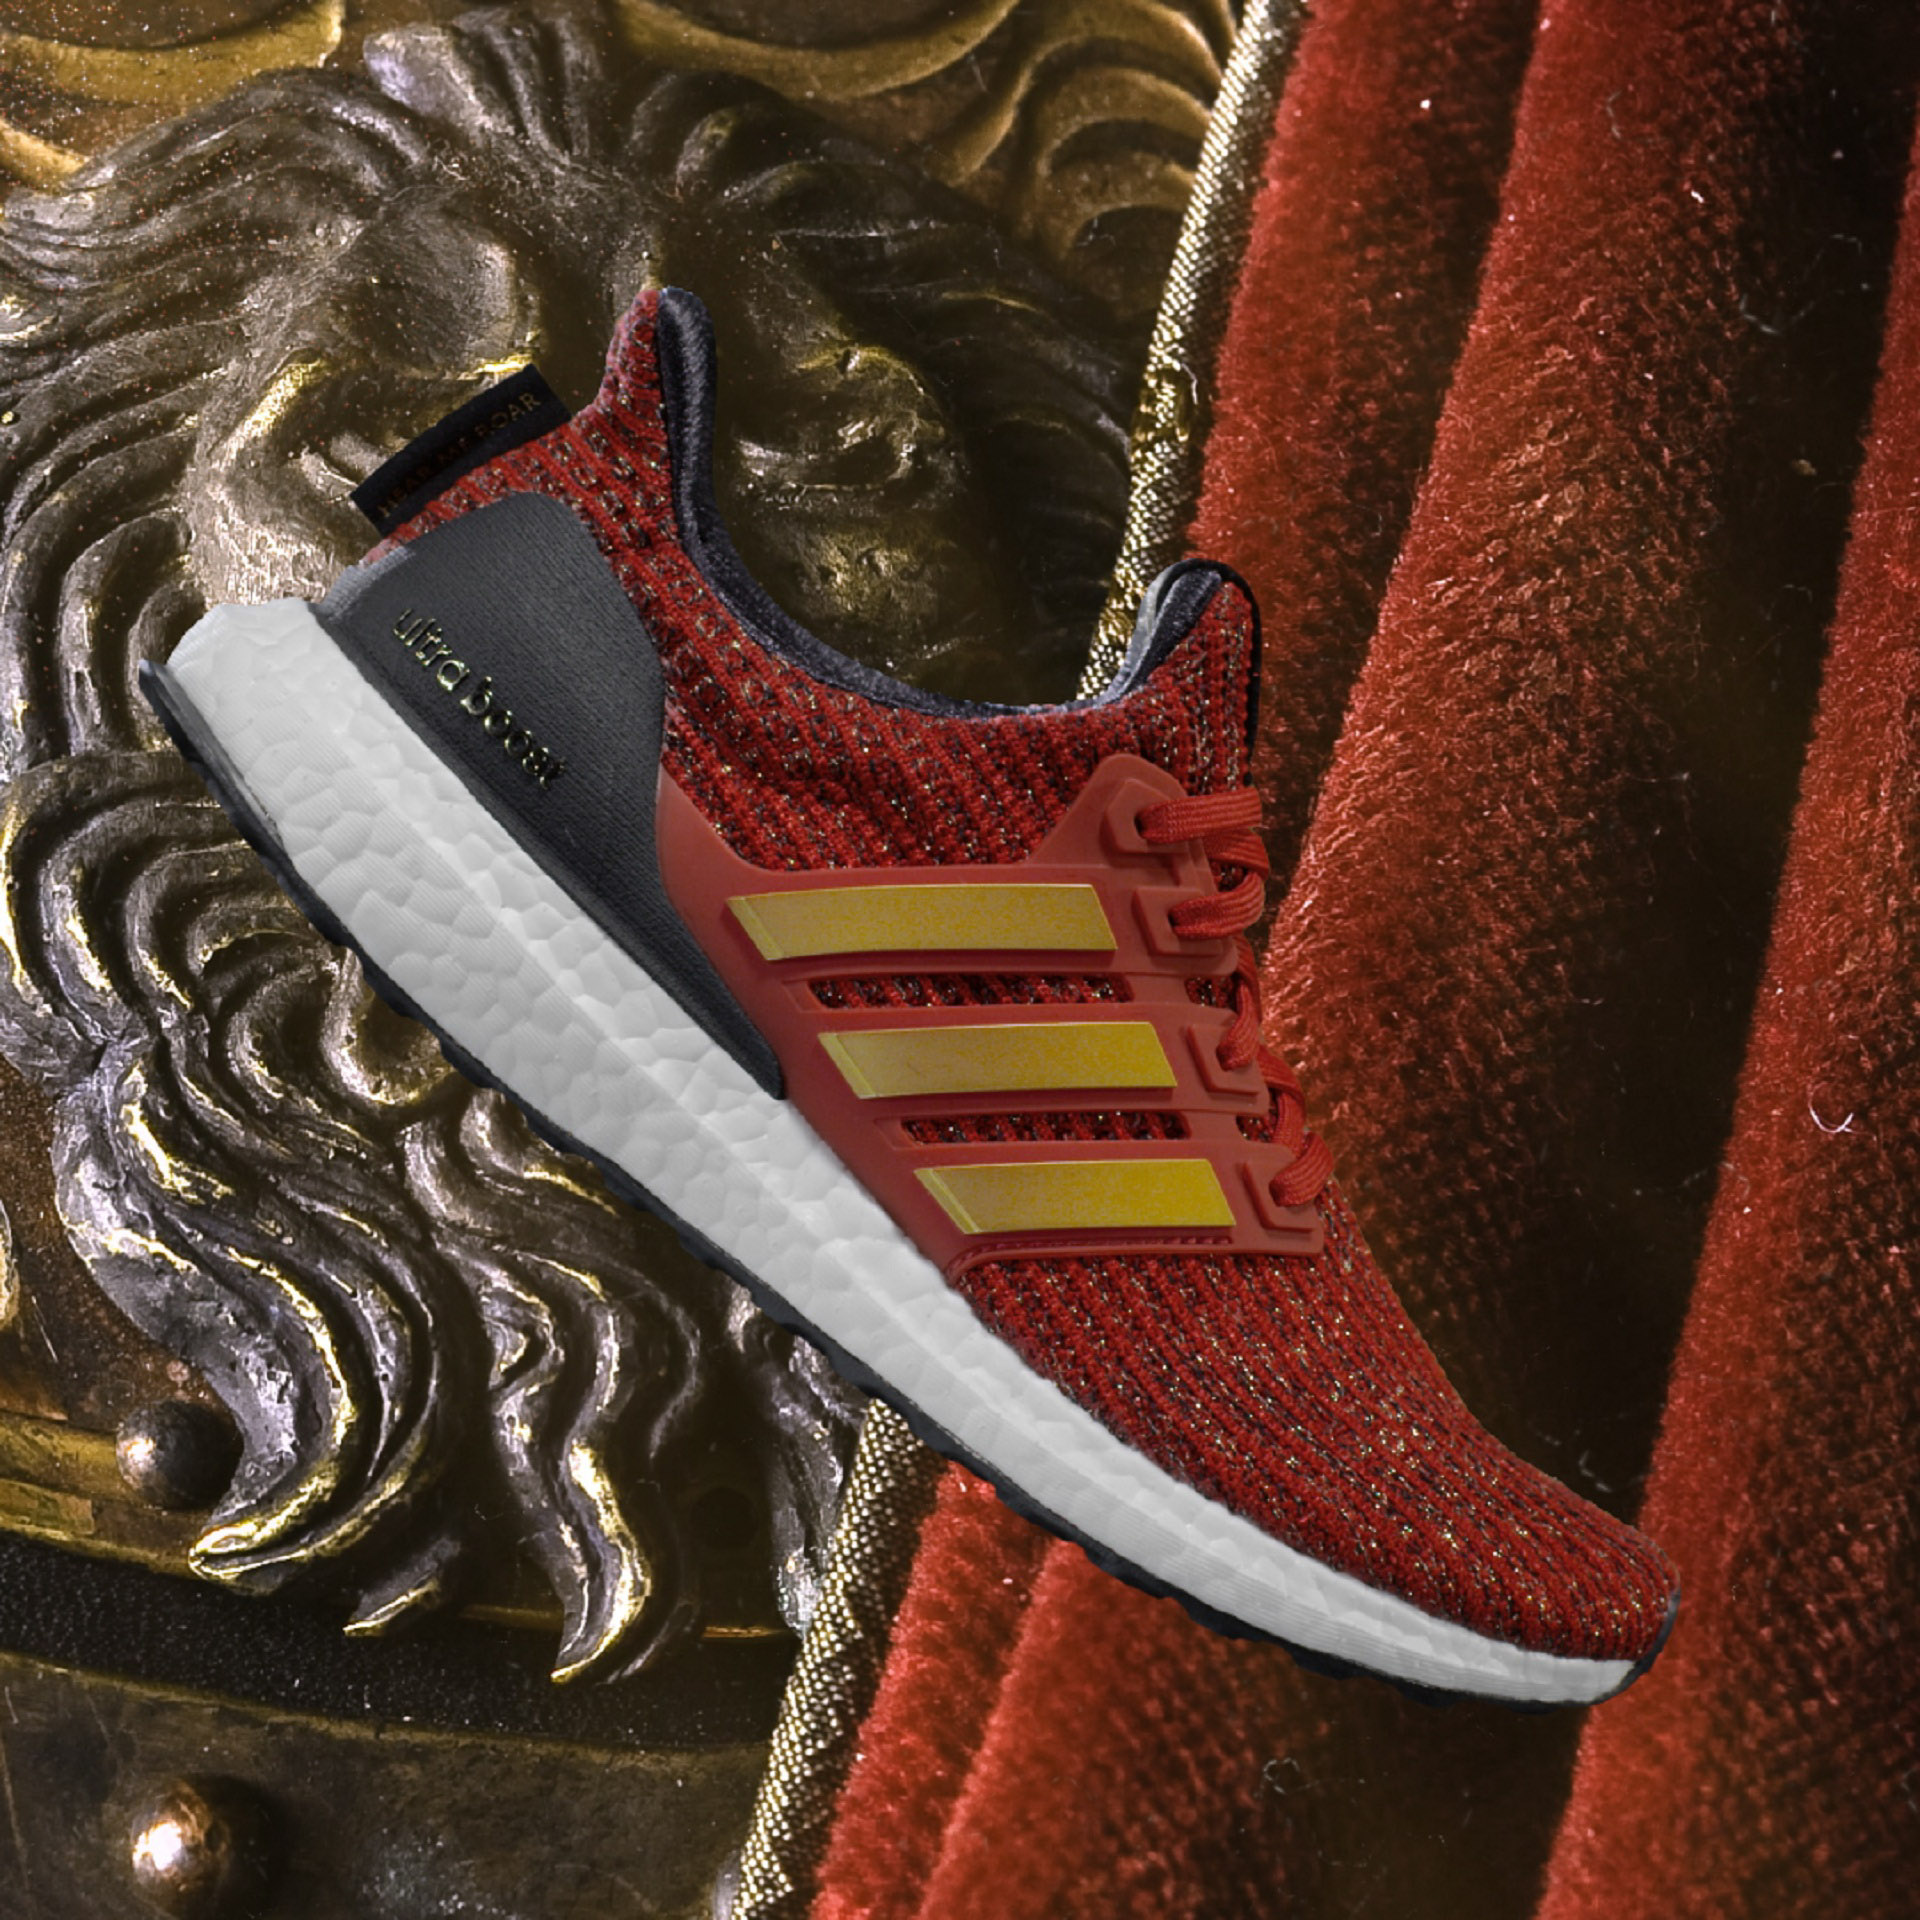 Game of Thrones x adidas UltraBOOST 14